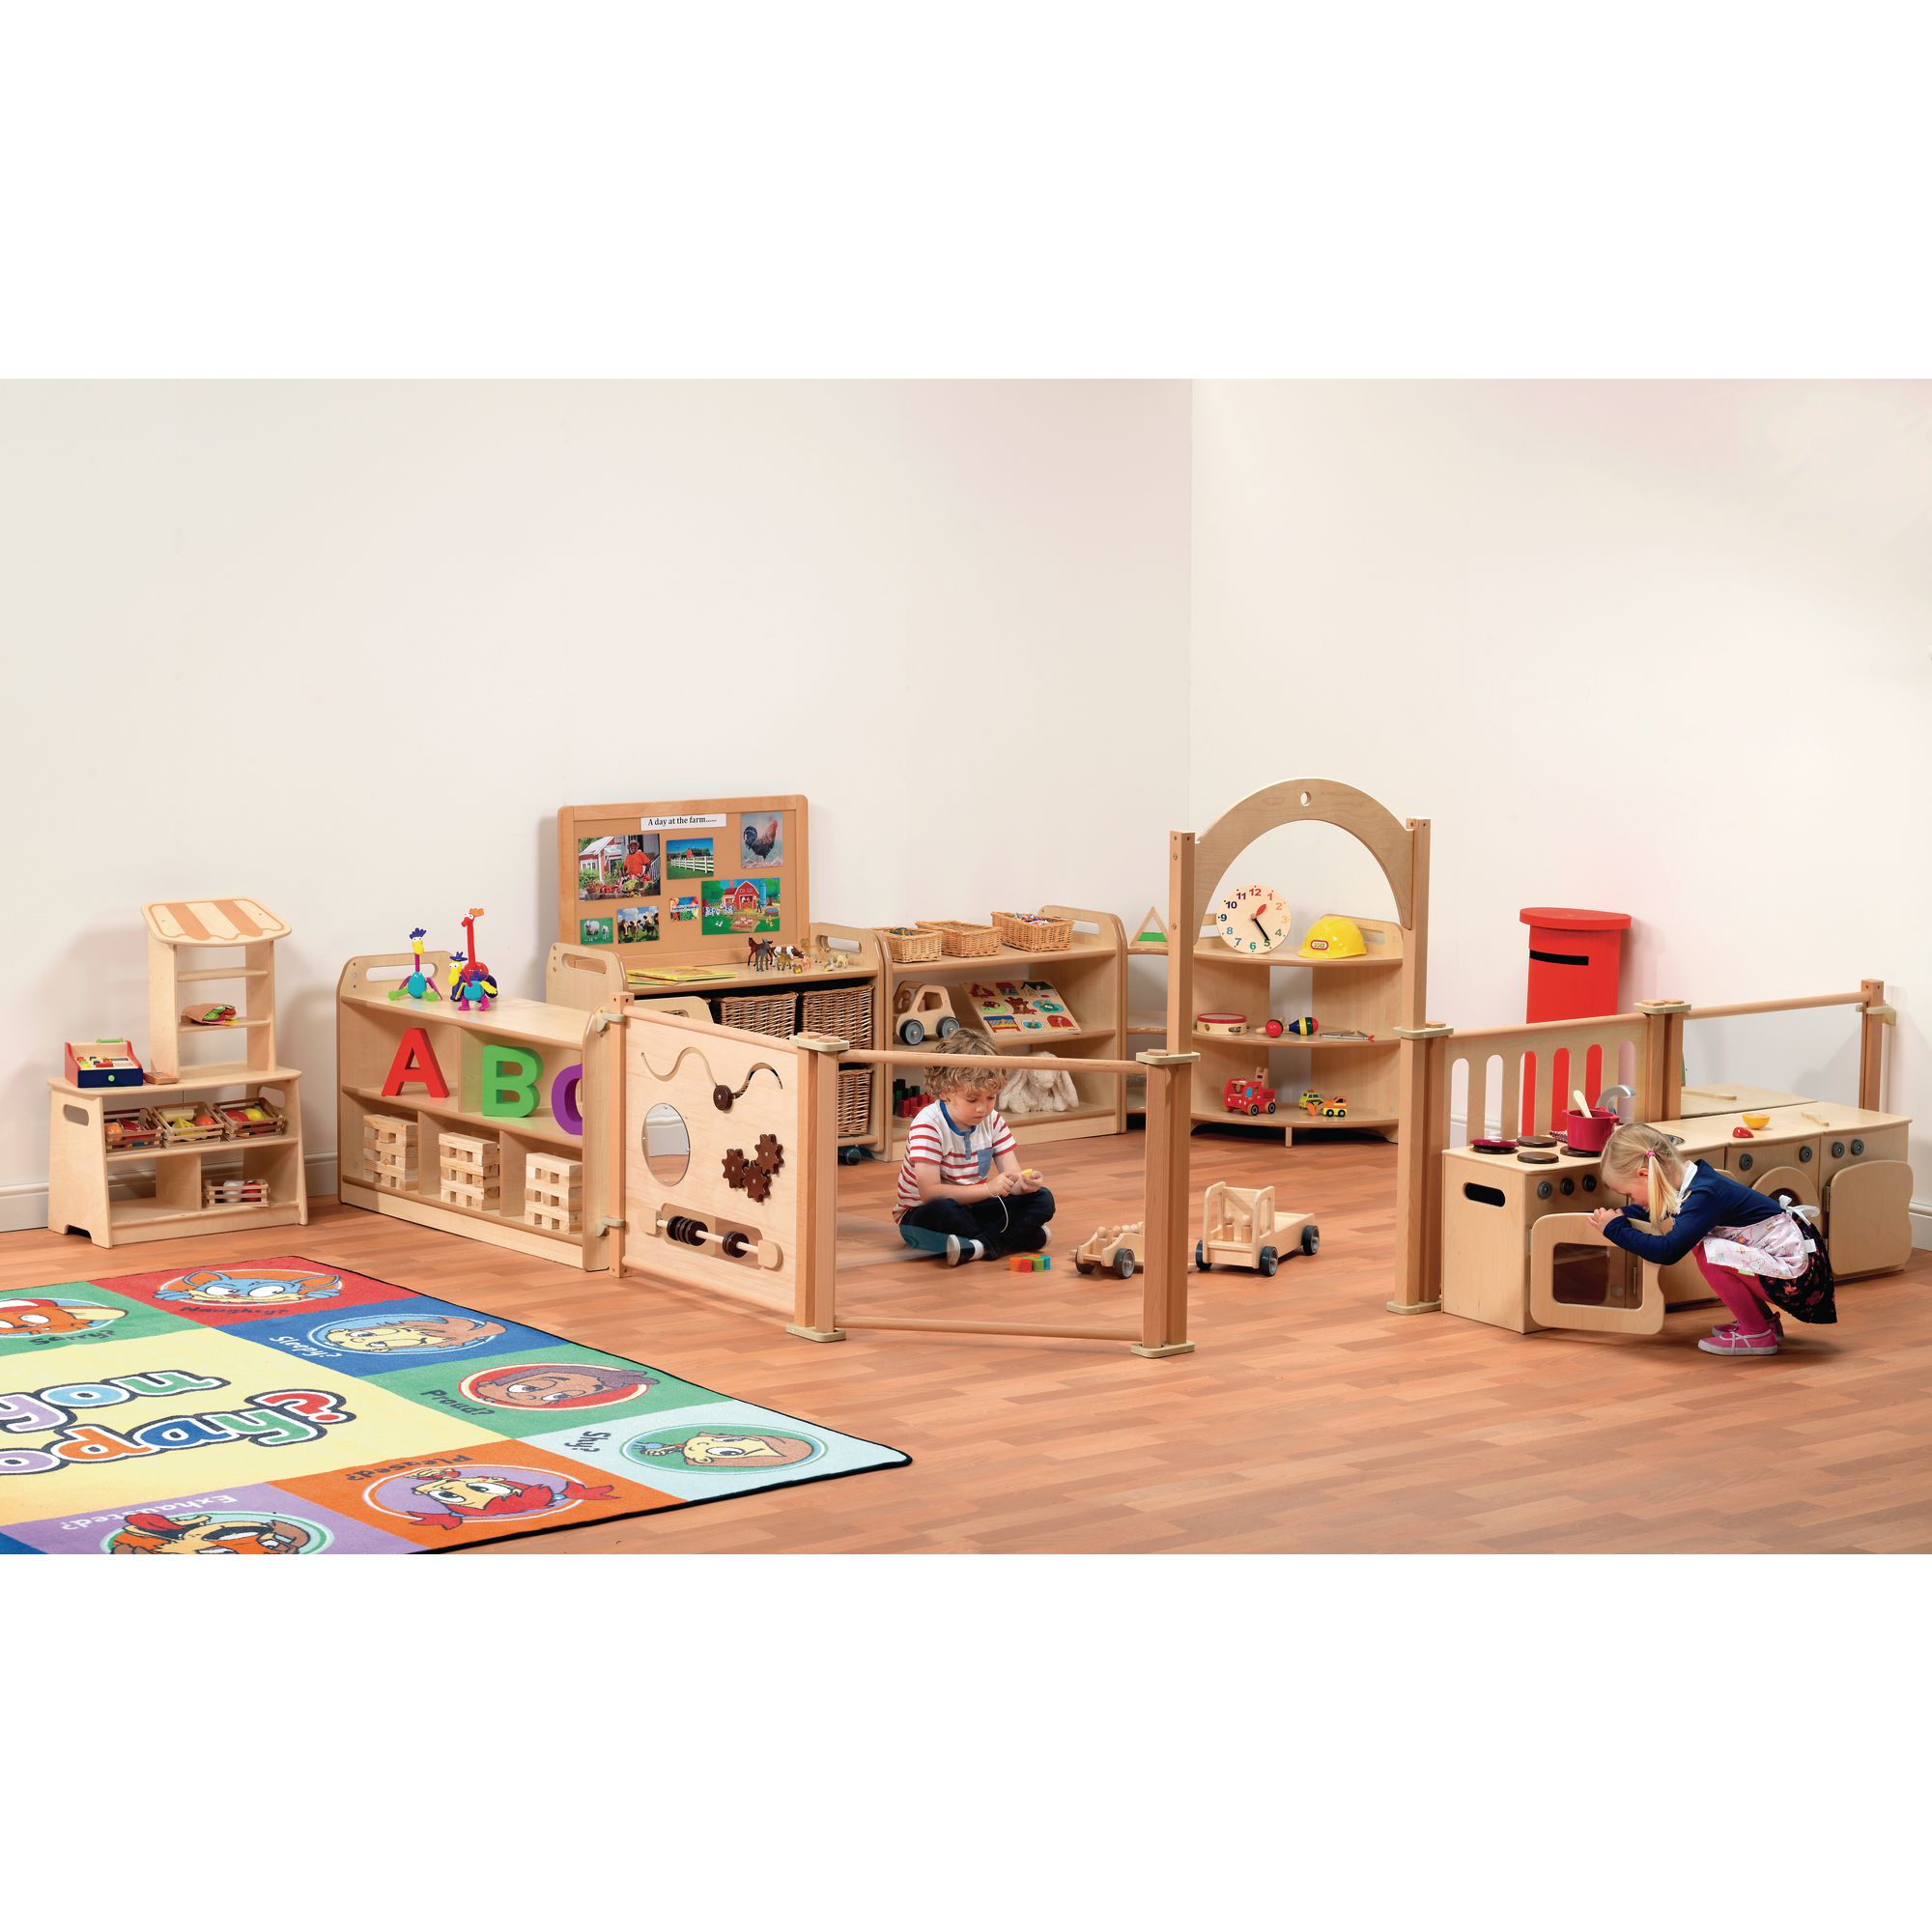 Playscapes Imagination Zone Wicker